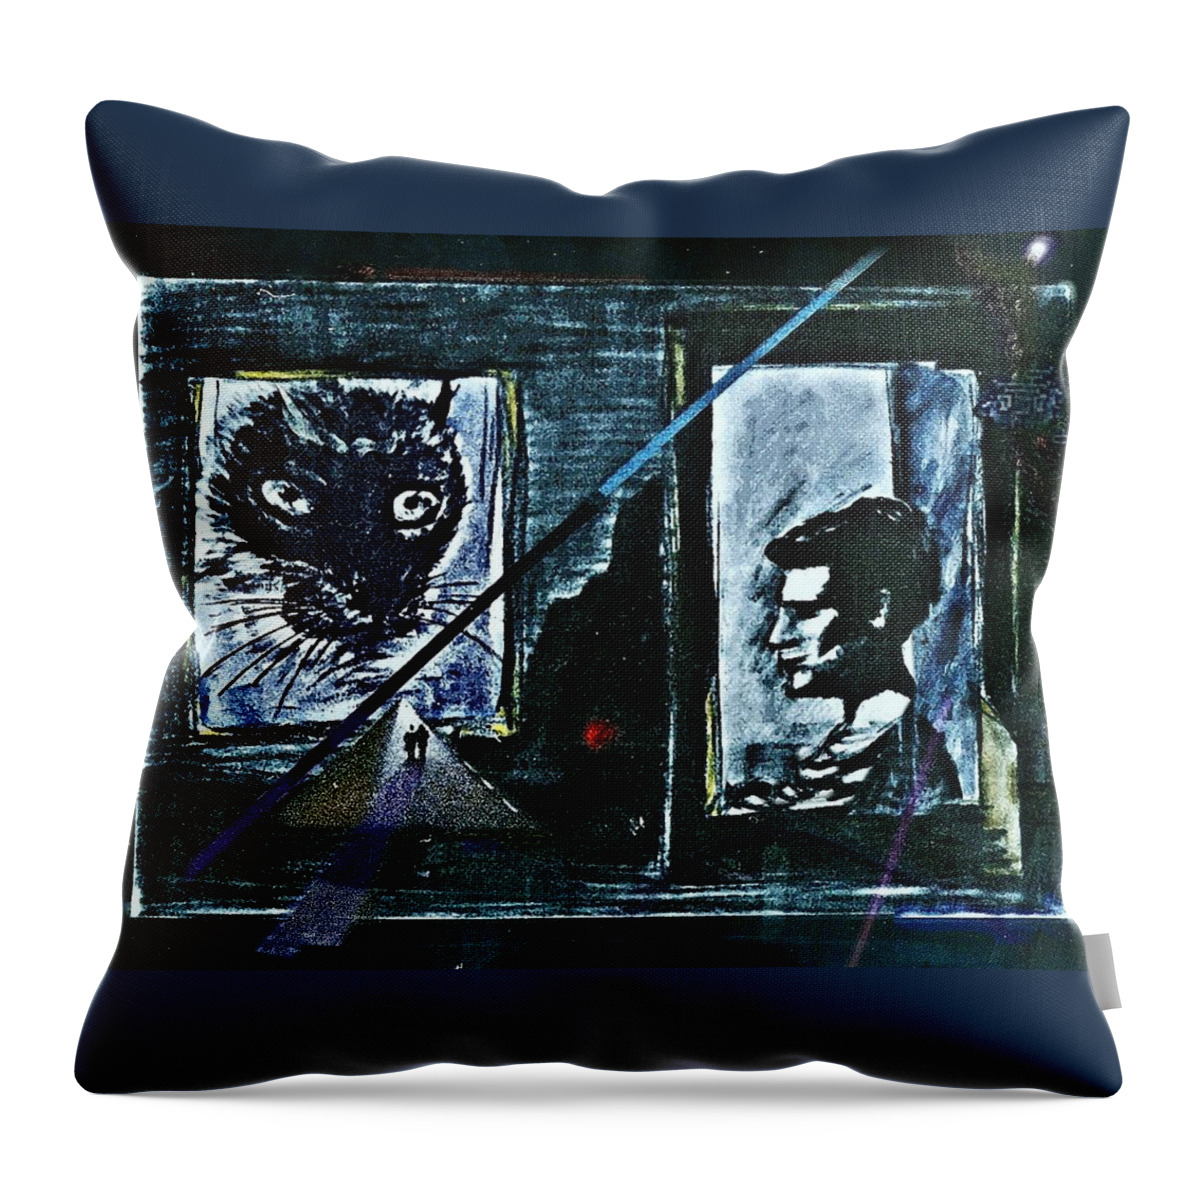 Night Throw Pillow featuring the painting Lonely Night by Hartmut Jager